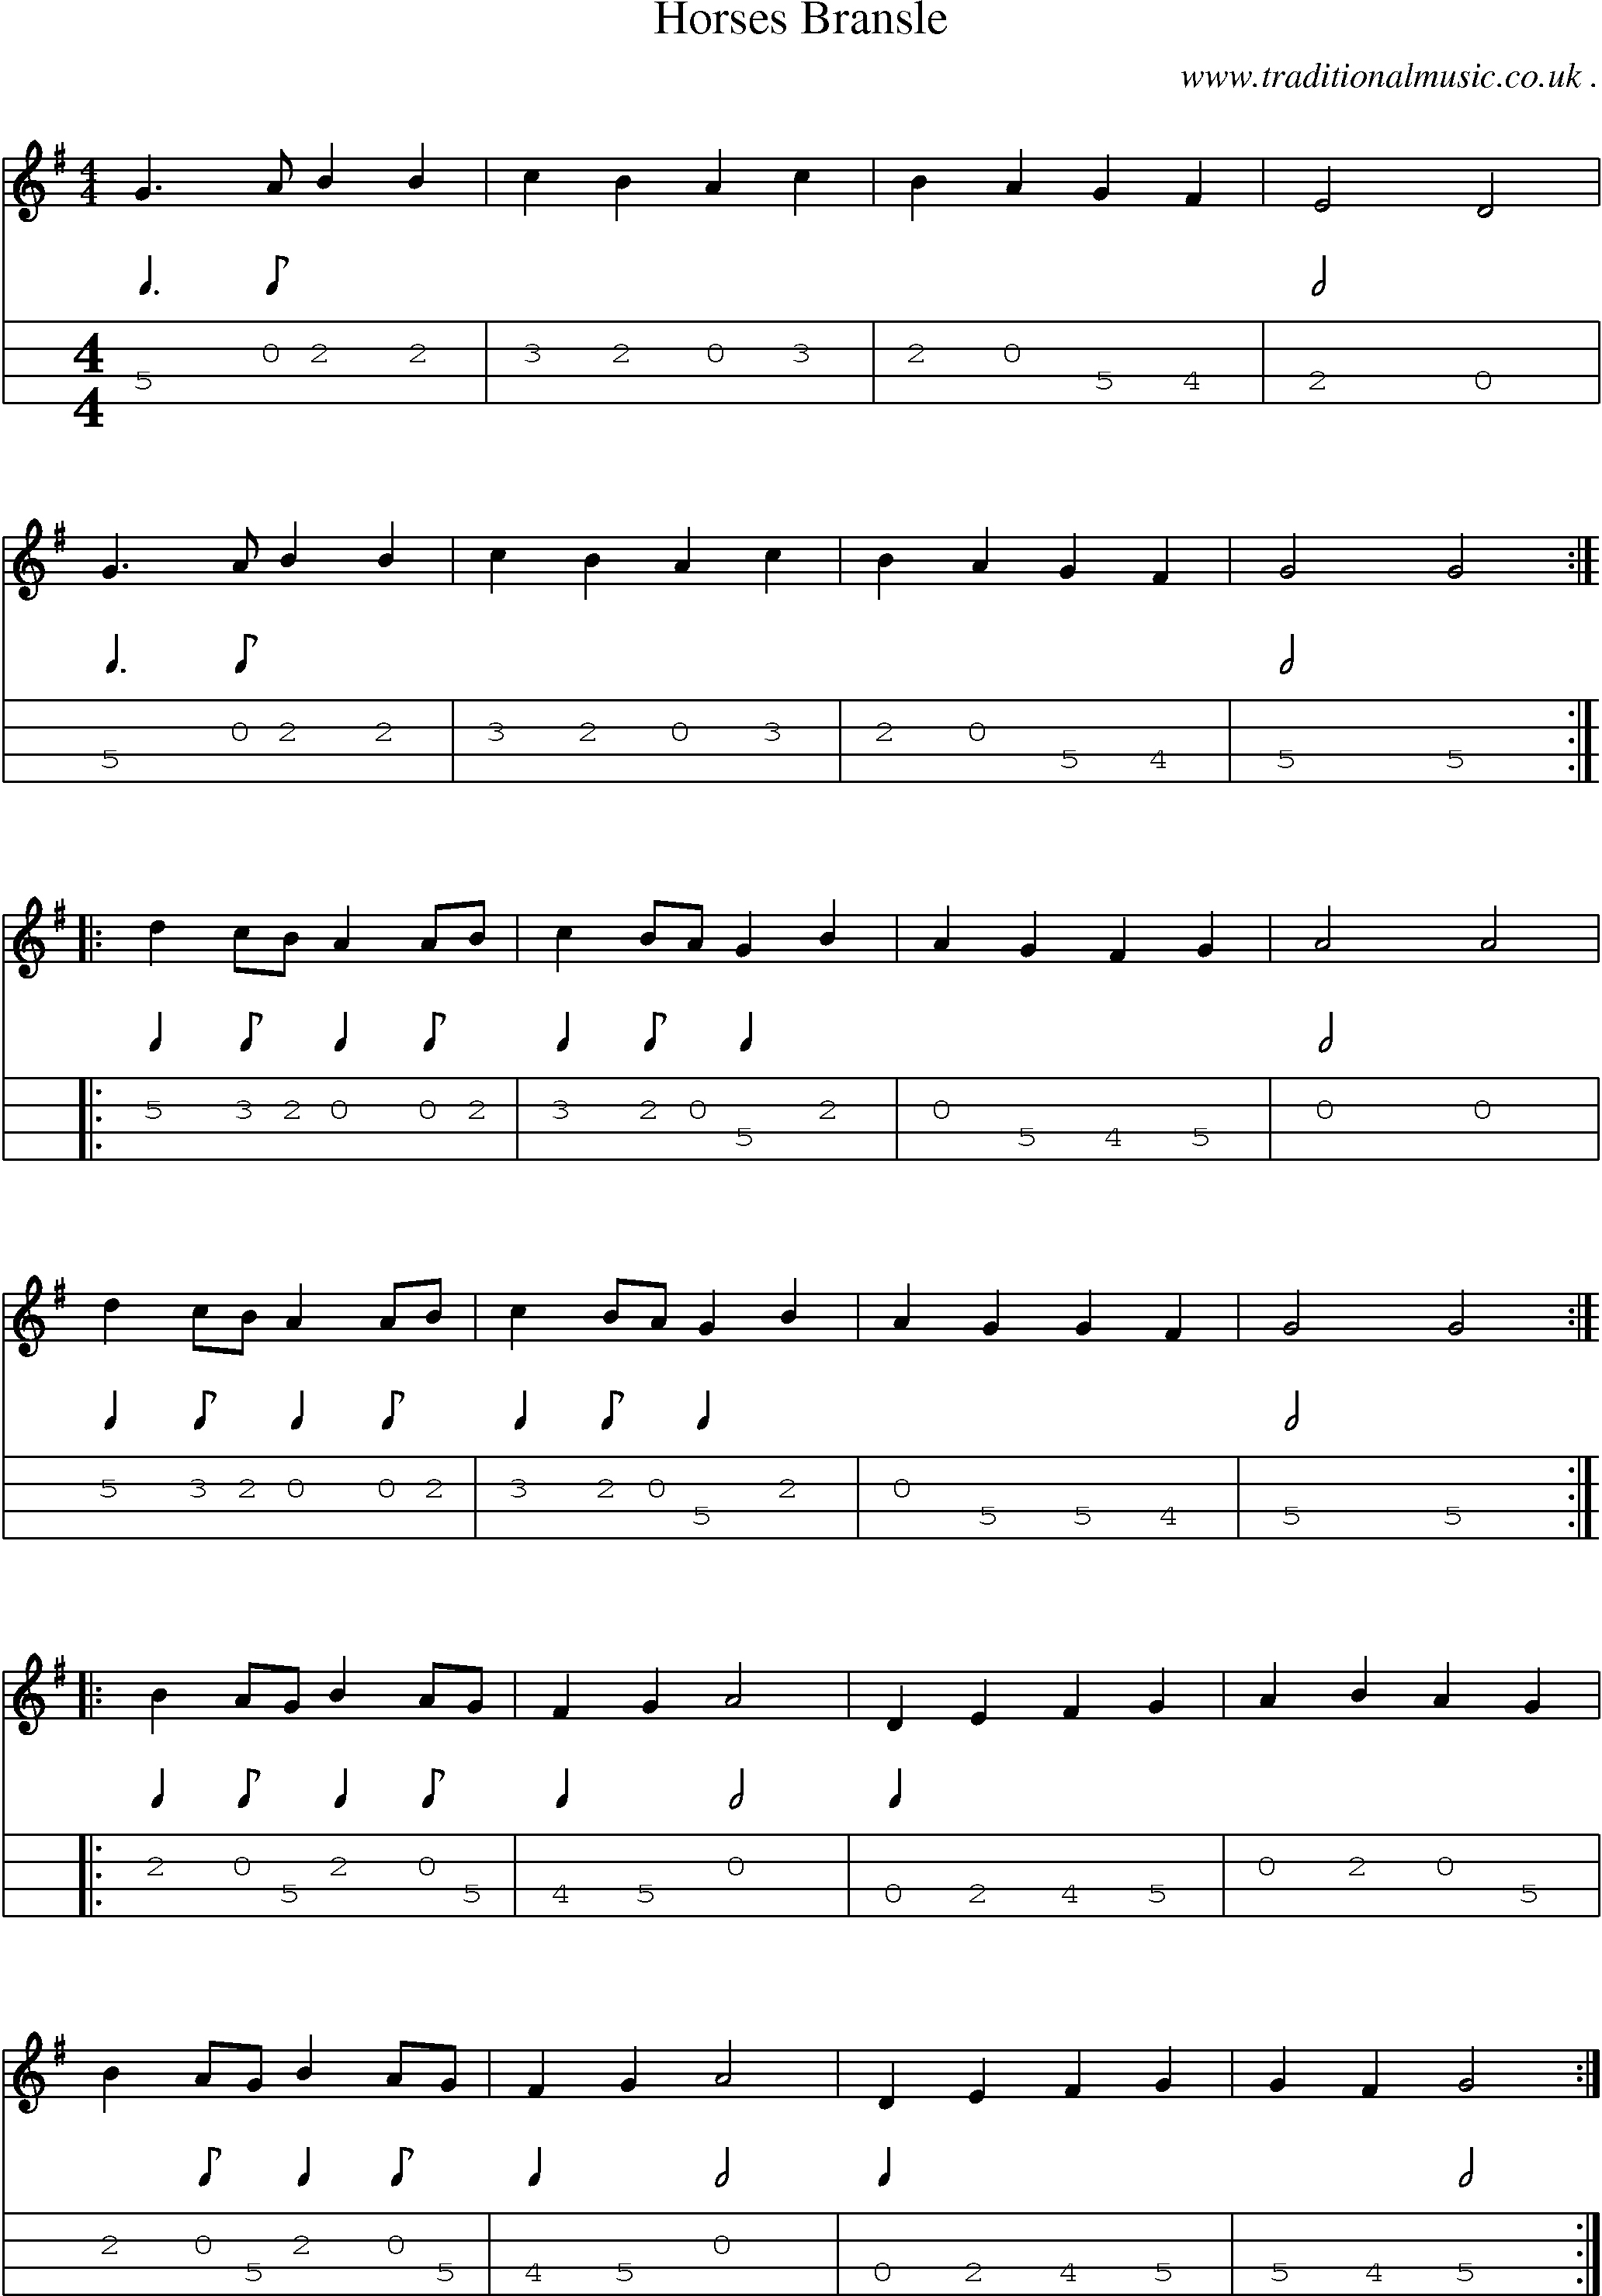 Sheet-Music and Mandolin Tabs for Horses Bransle